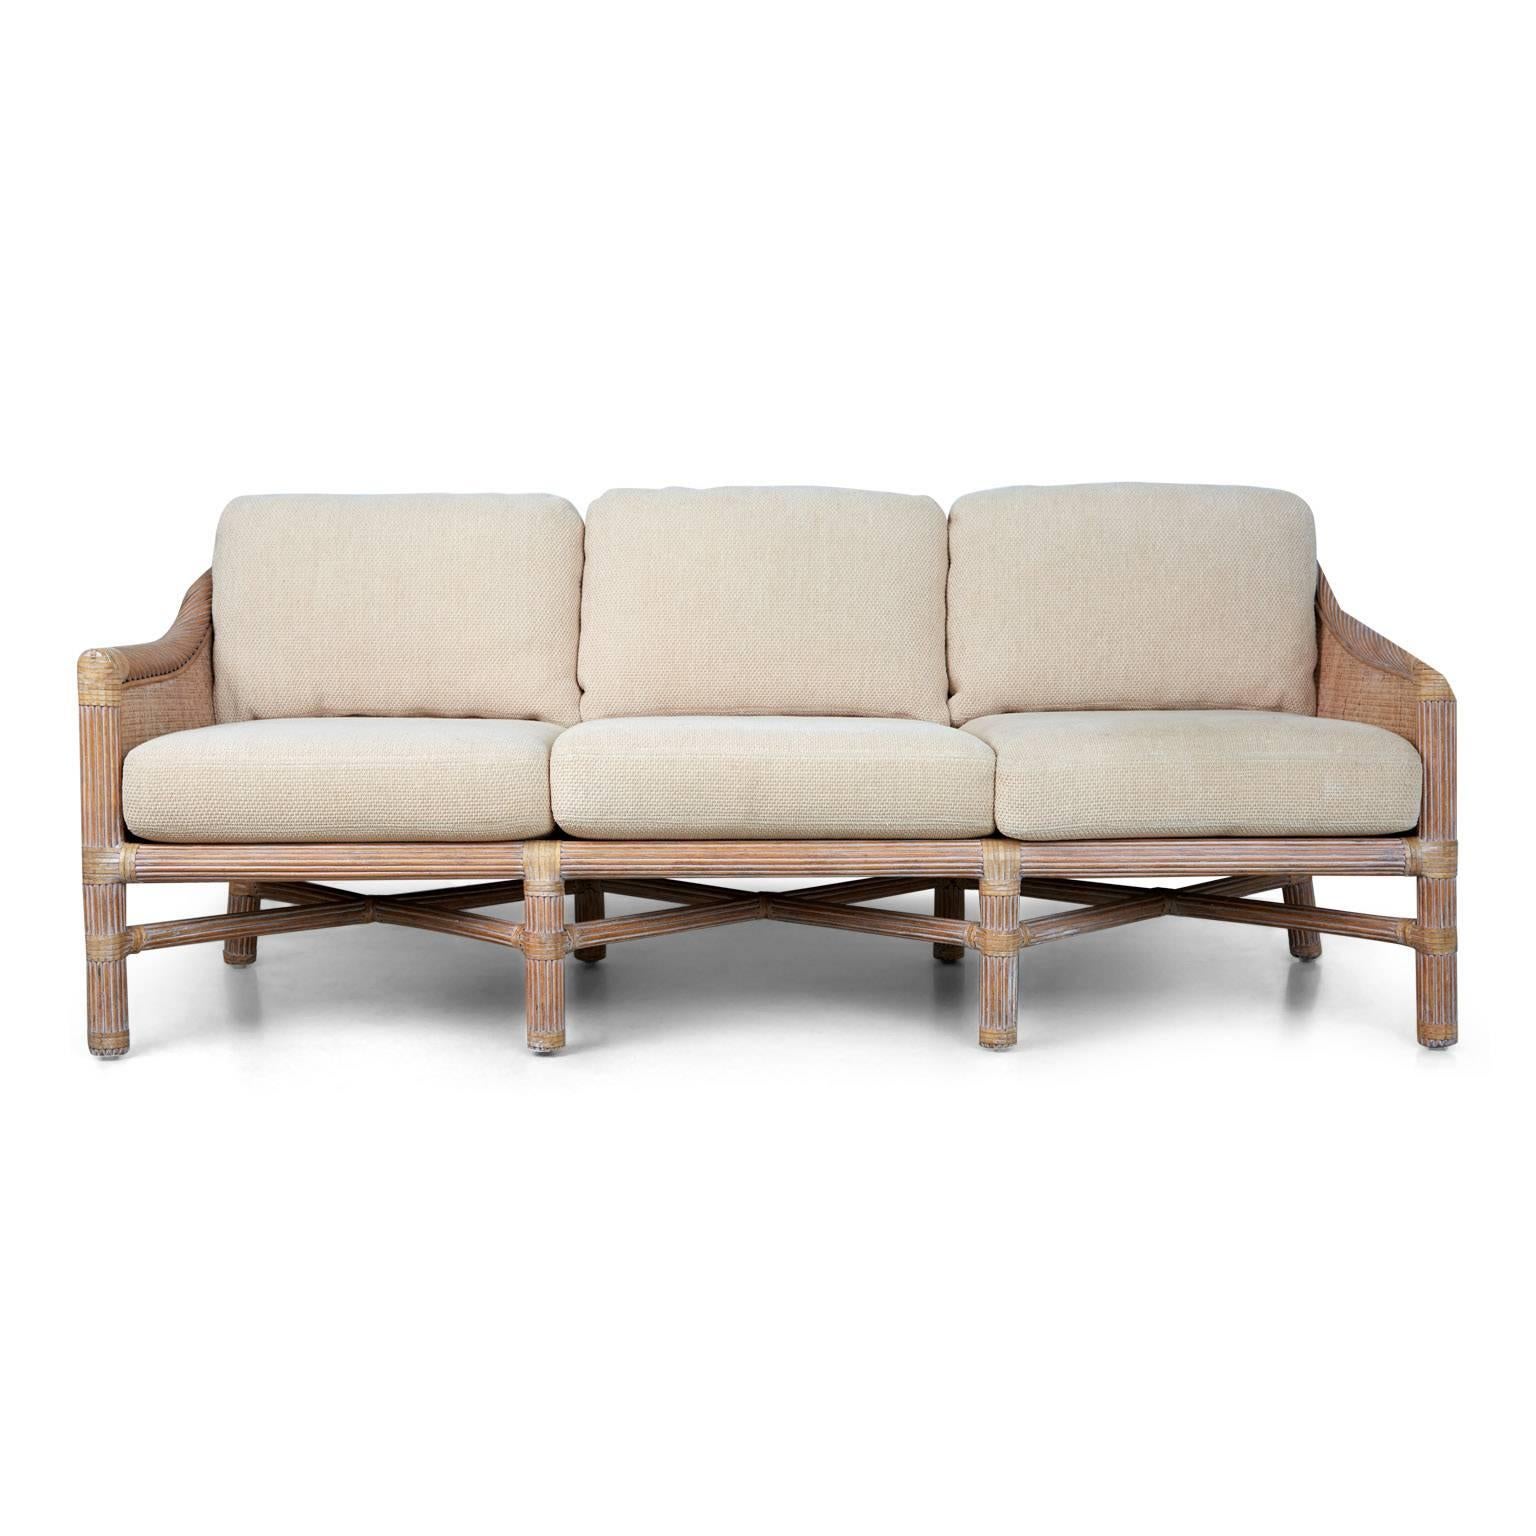 Elegant set of wicker McGuire furniture that can be used indoor or out, which includes one (1) three seat sofa, (1) side table and (1) coffee table. The seats and frame of the sofa are fabricated fabricated from woven rattan and bamboo that has been